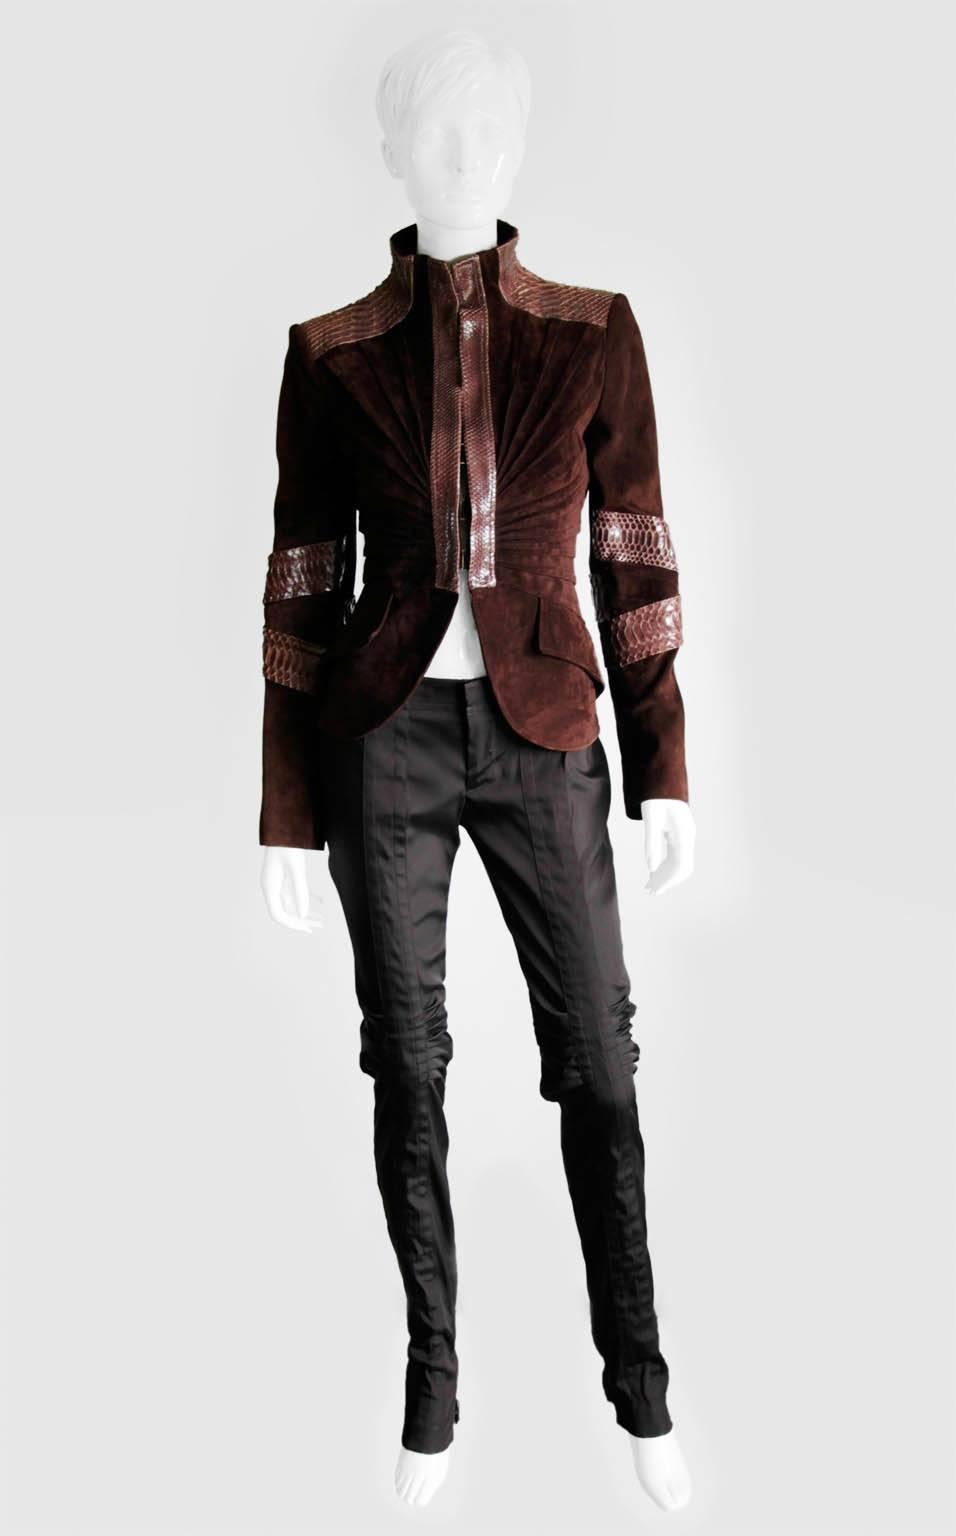 That Uber Rare Tom Ford For Gucci FW 2004 Runway & Ad Campaign Python & Suede Fan Jacket!

Who could ever forget that incredible aubergine python & suede jacket with the heavenly 